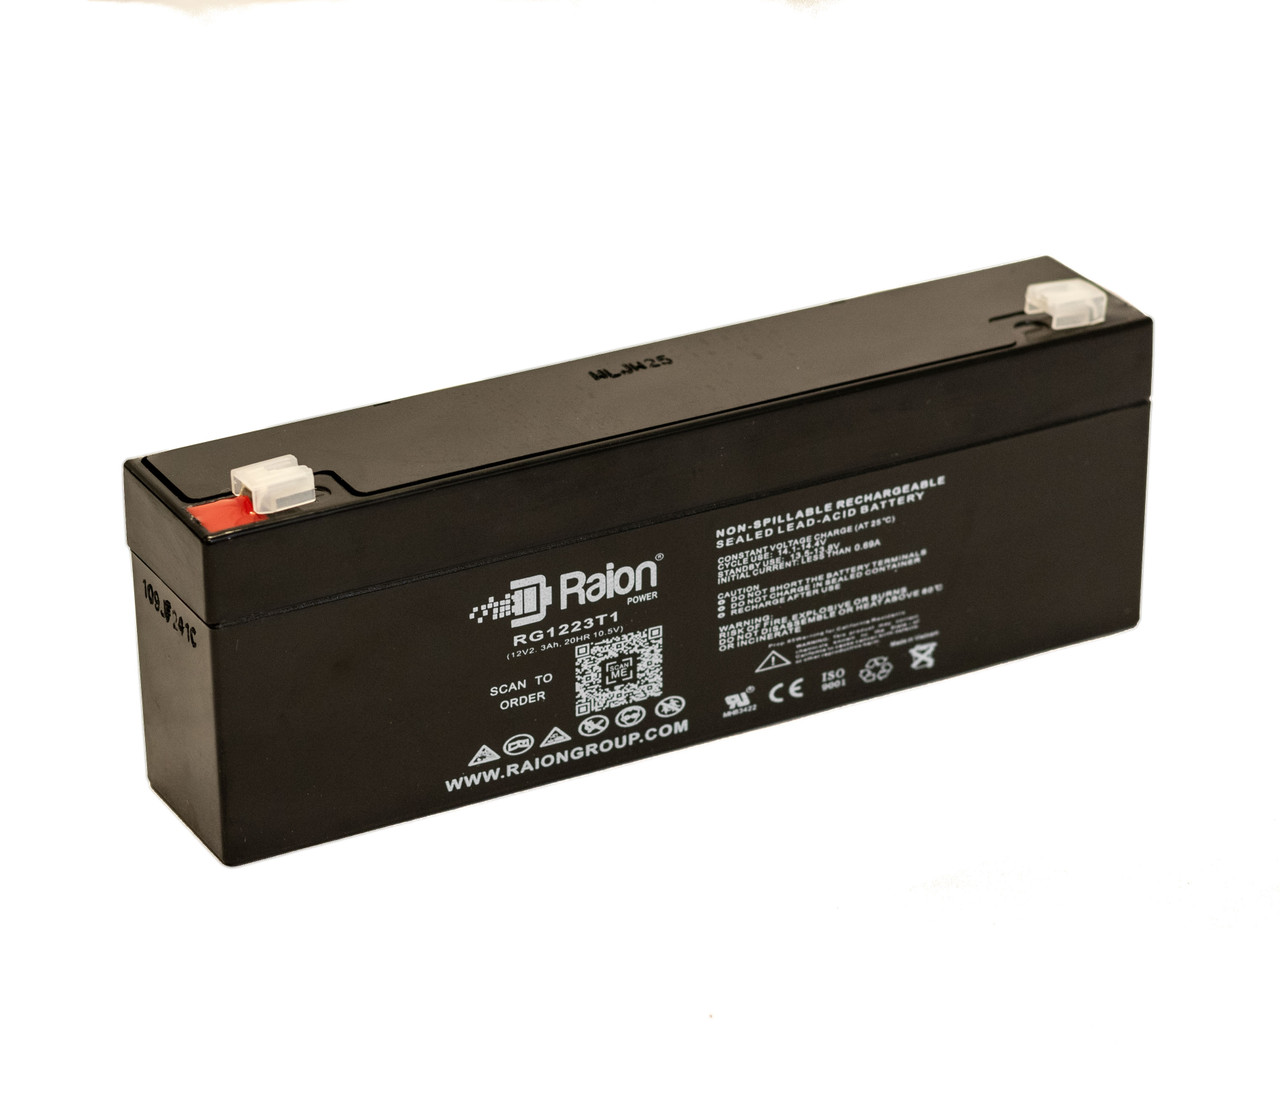 Raion Power RG1223T1 Replacement Battery for Invivo Research Inc. OMEGA 1445 BP Monitor